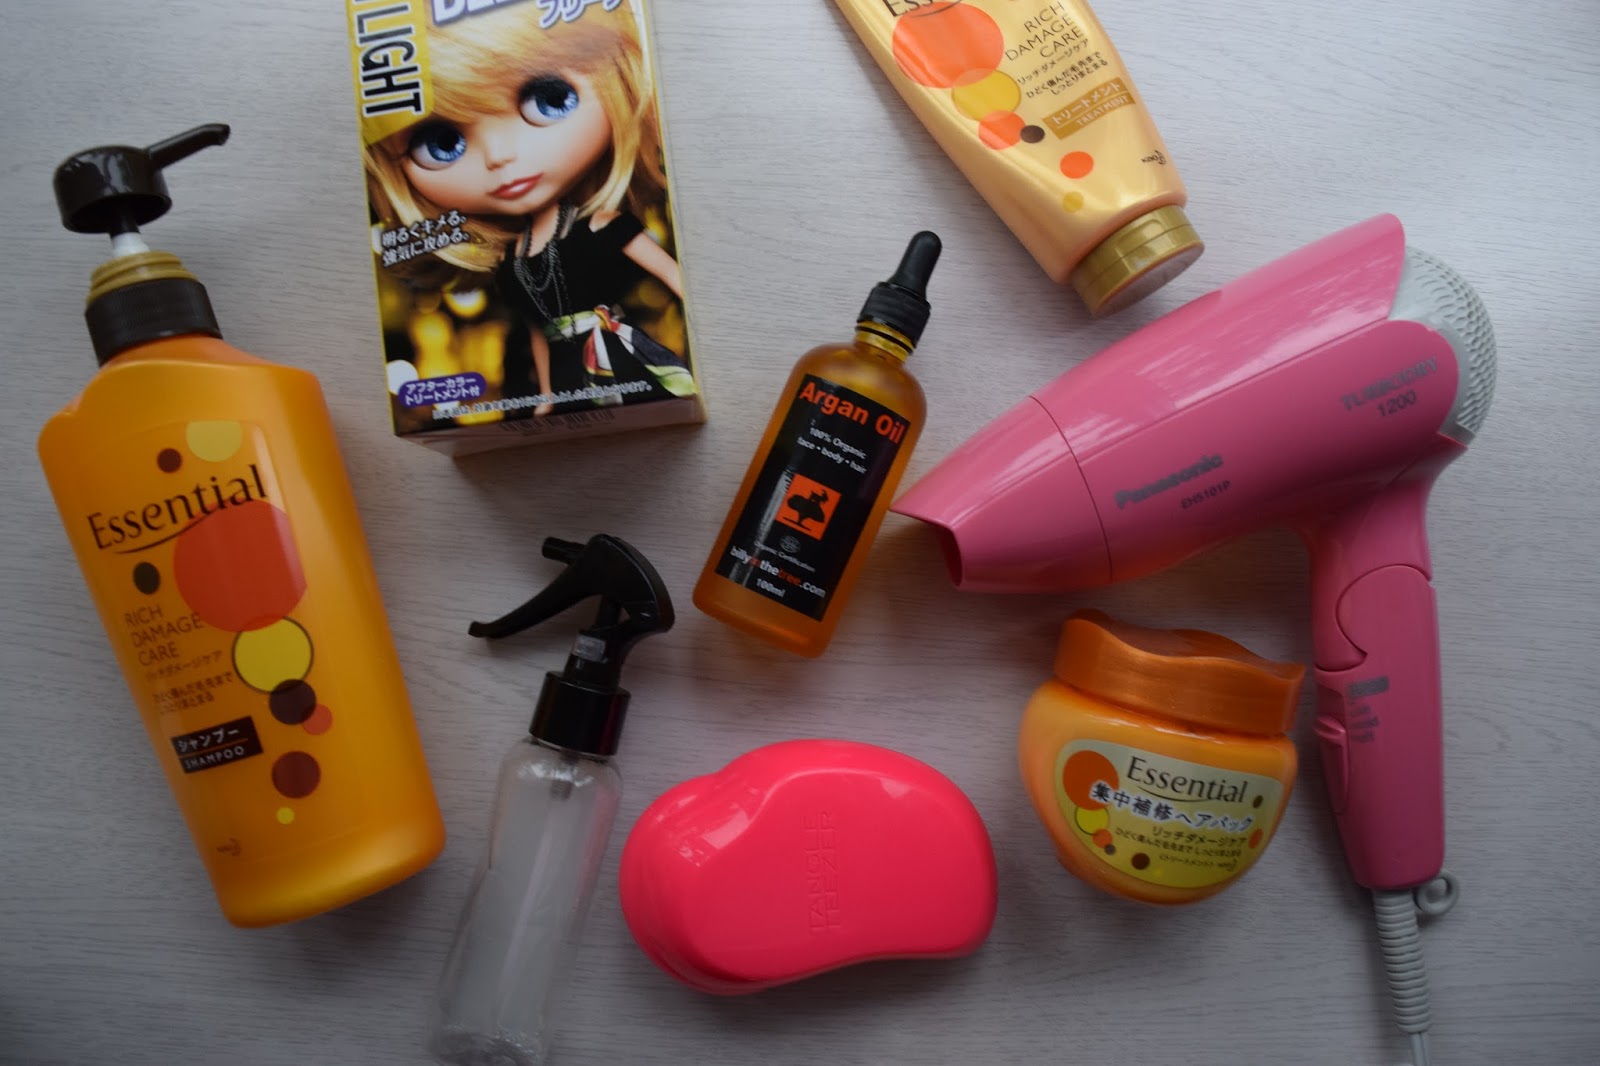 Bleached hair care products Japan